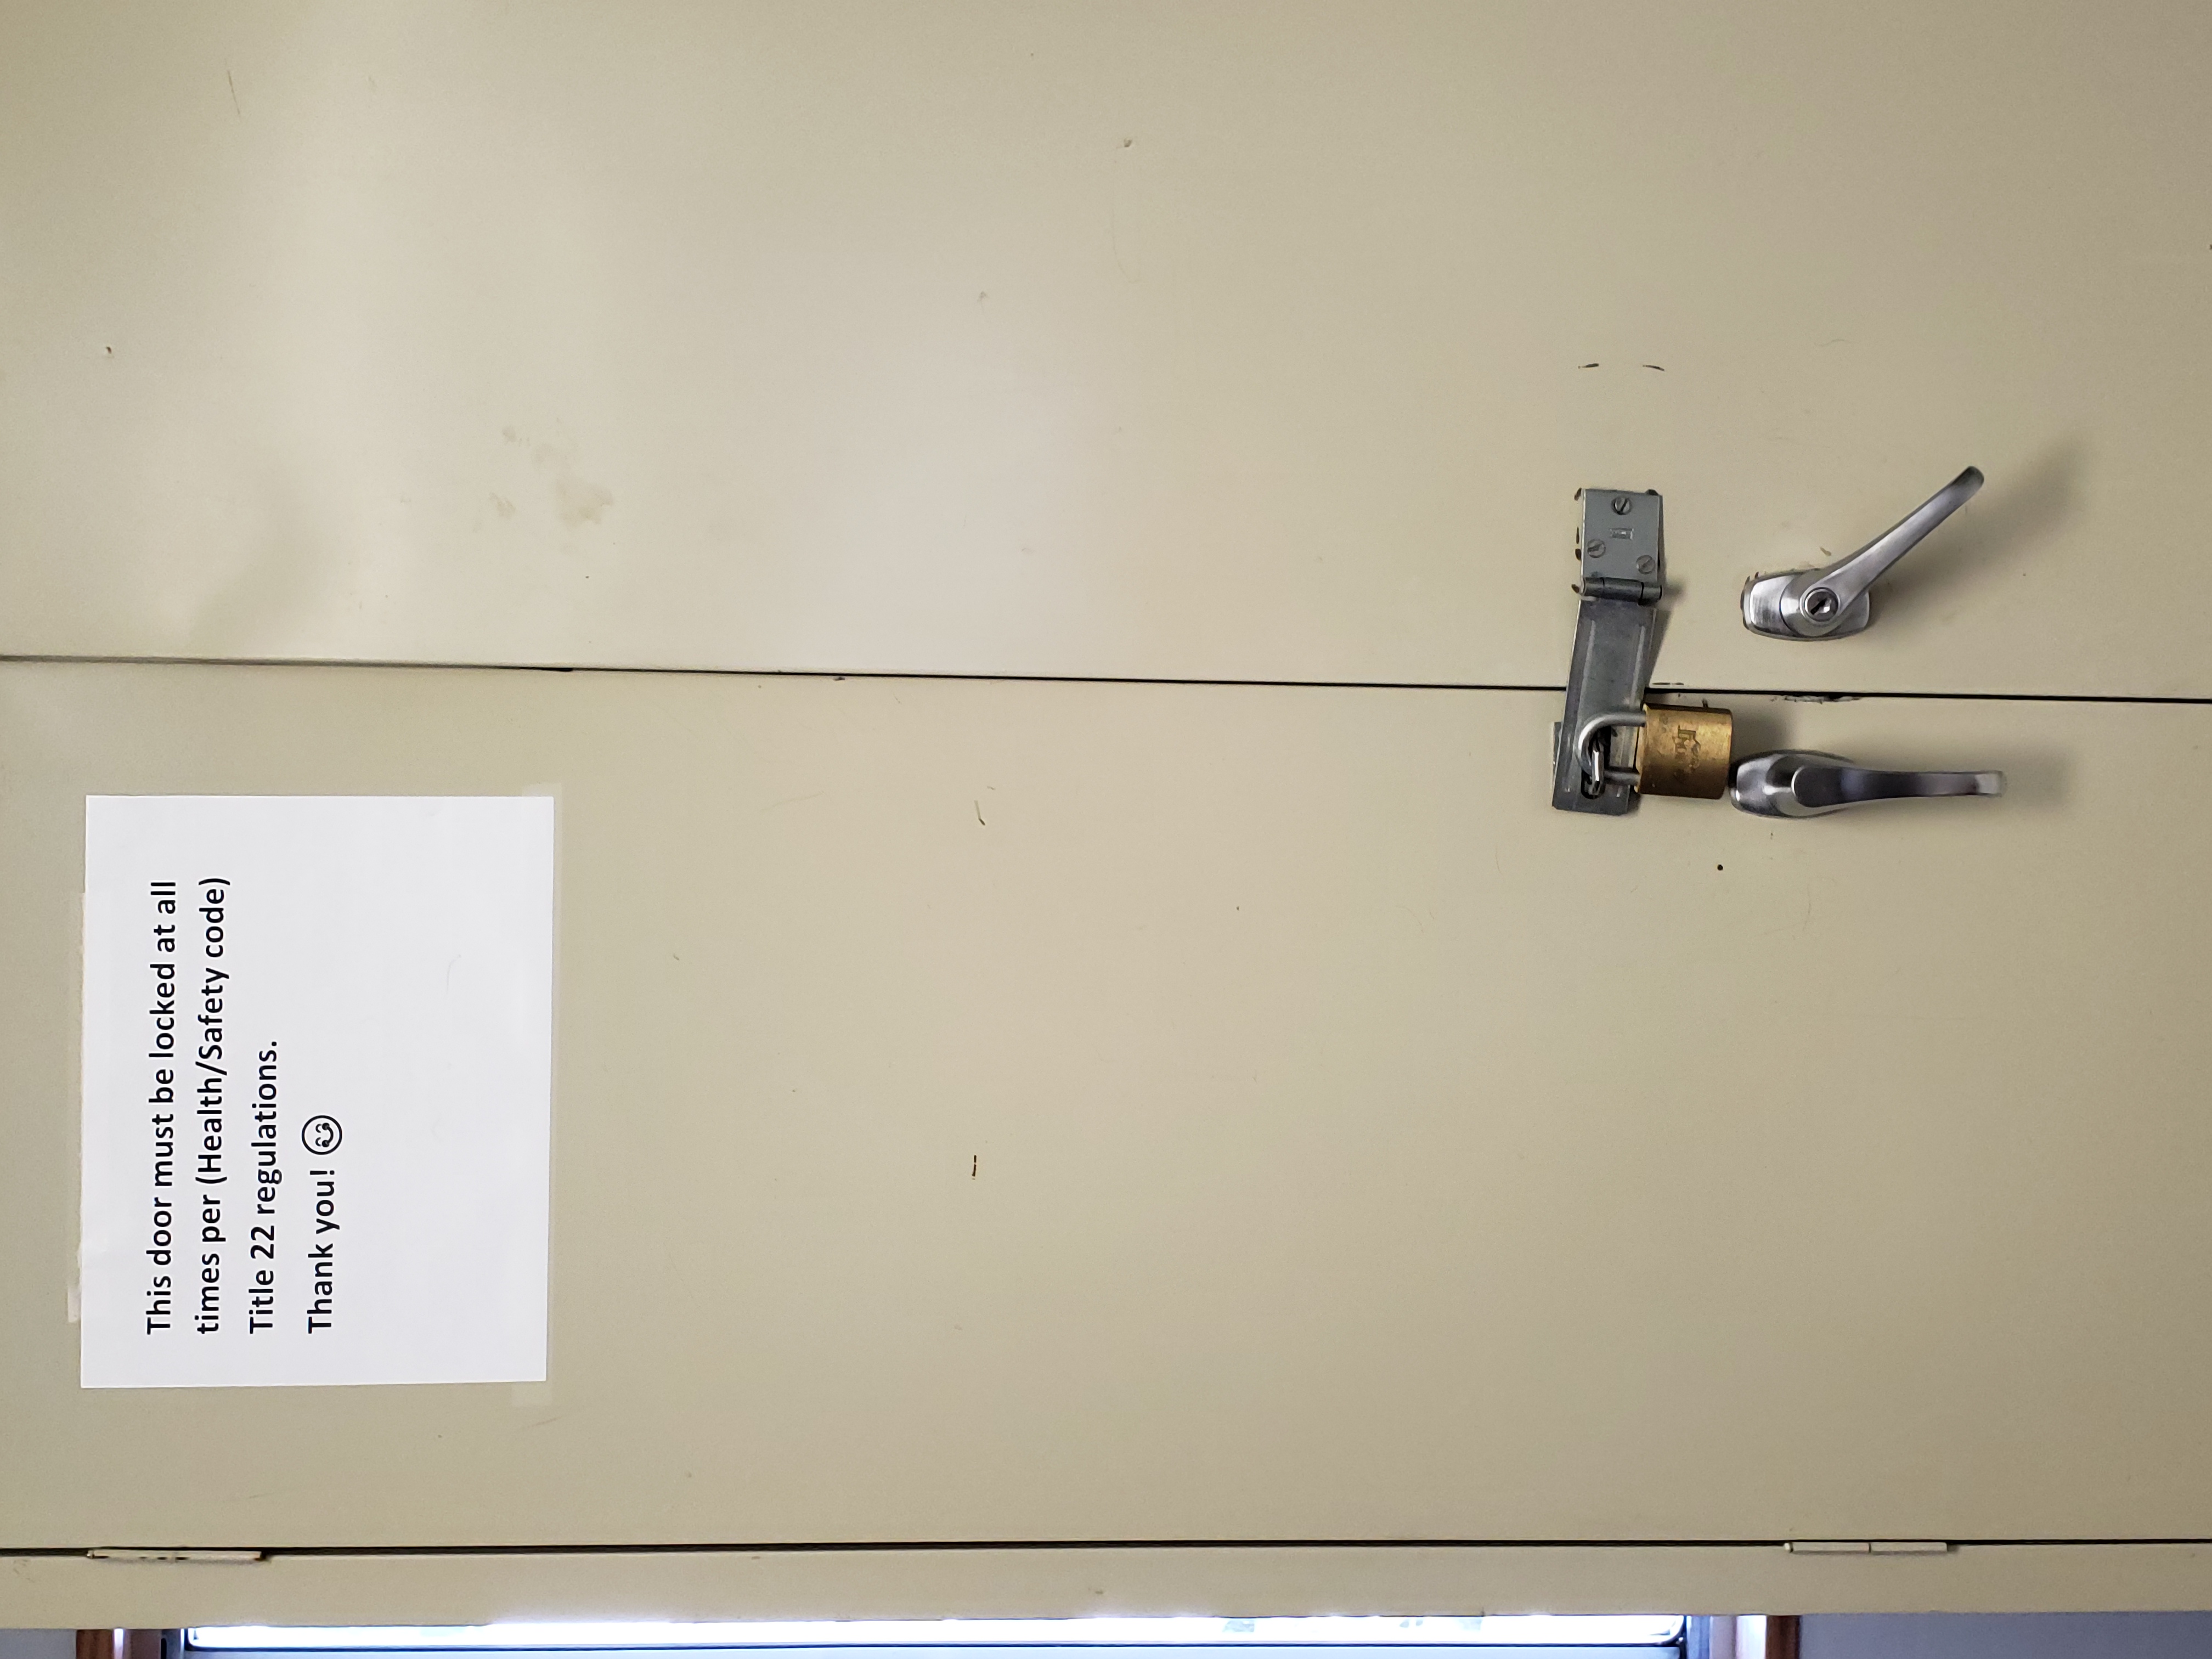 Cabinet with locked door and sign reading "this door must be locked at all times per (Health/safety code) title 22 regulations. Thank you! Smiley face. 